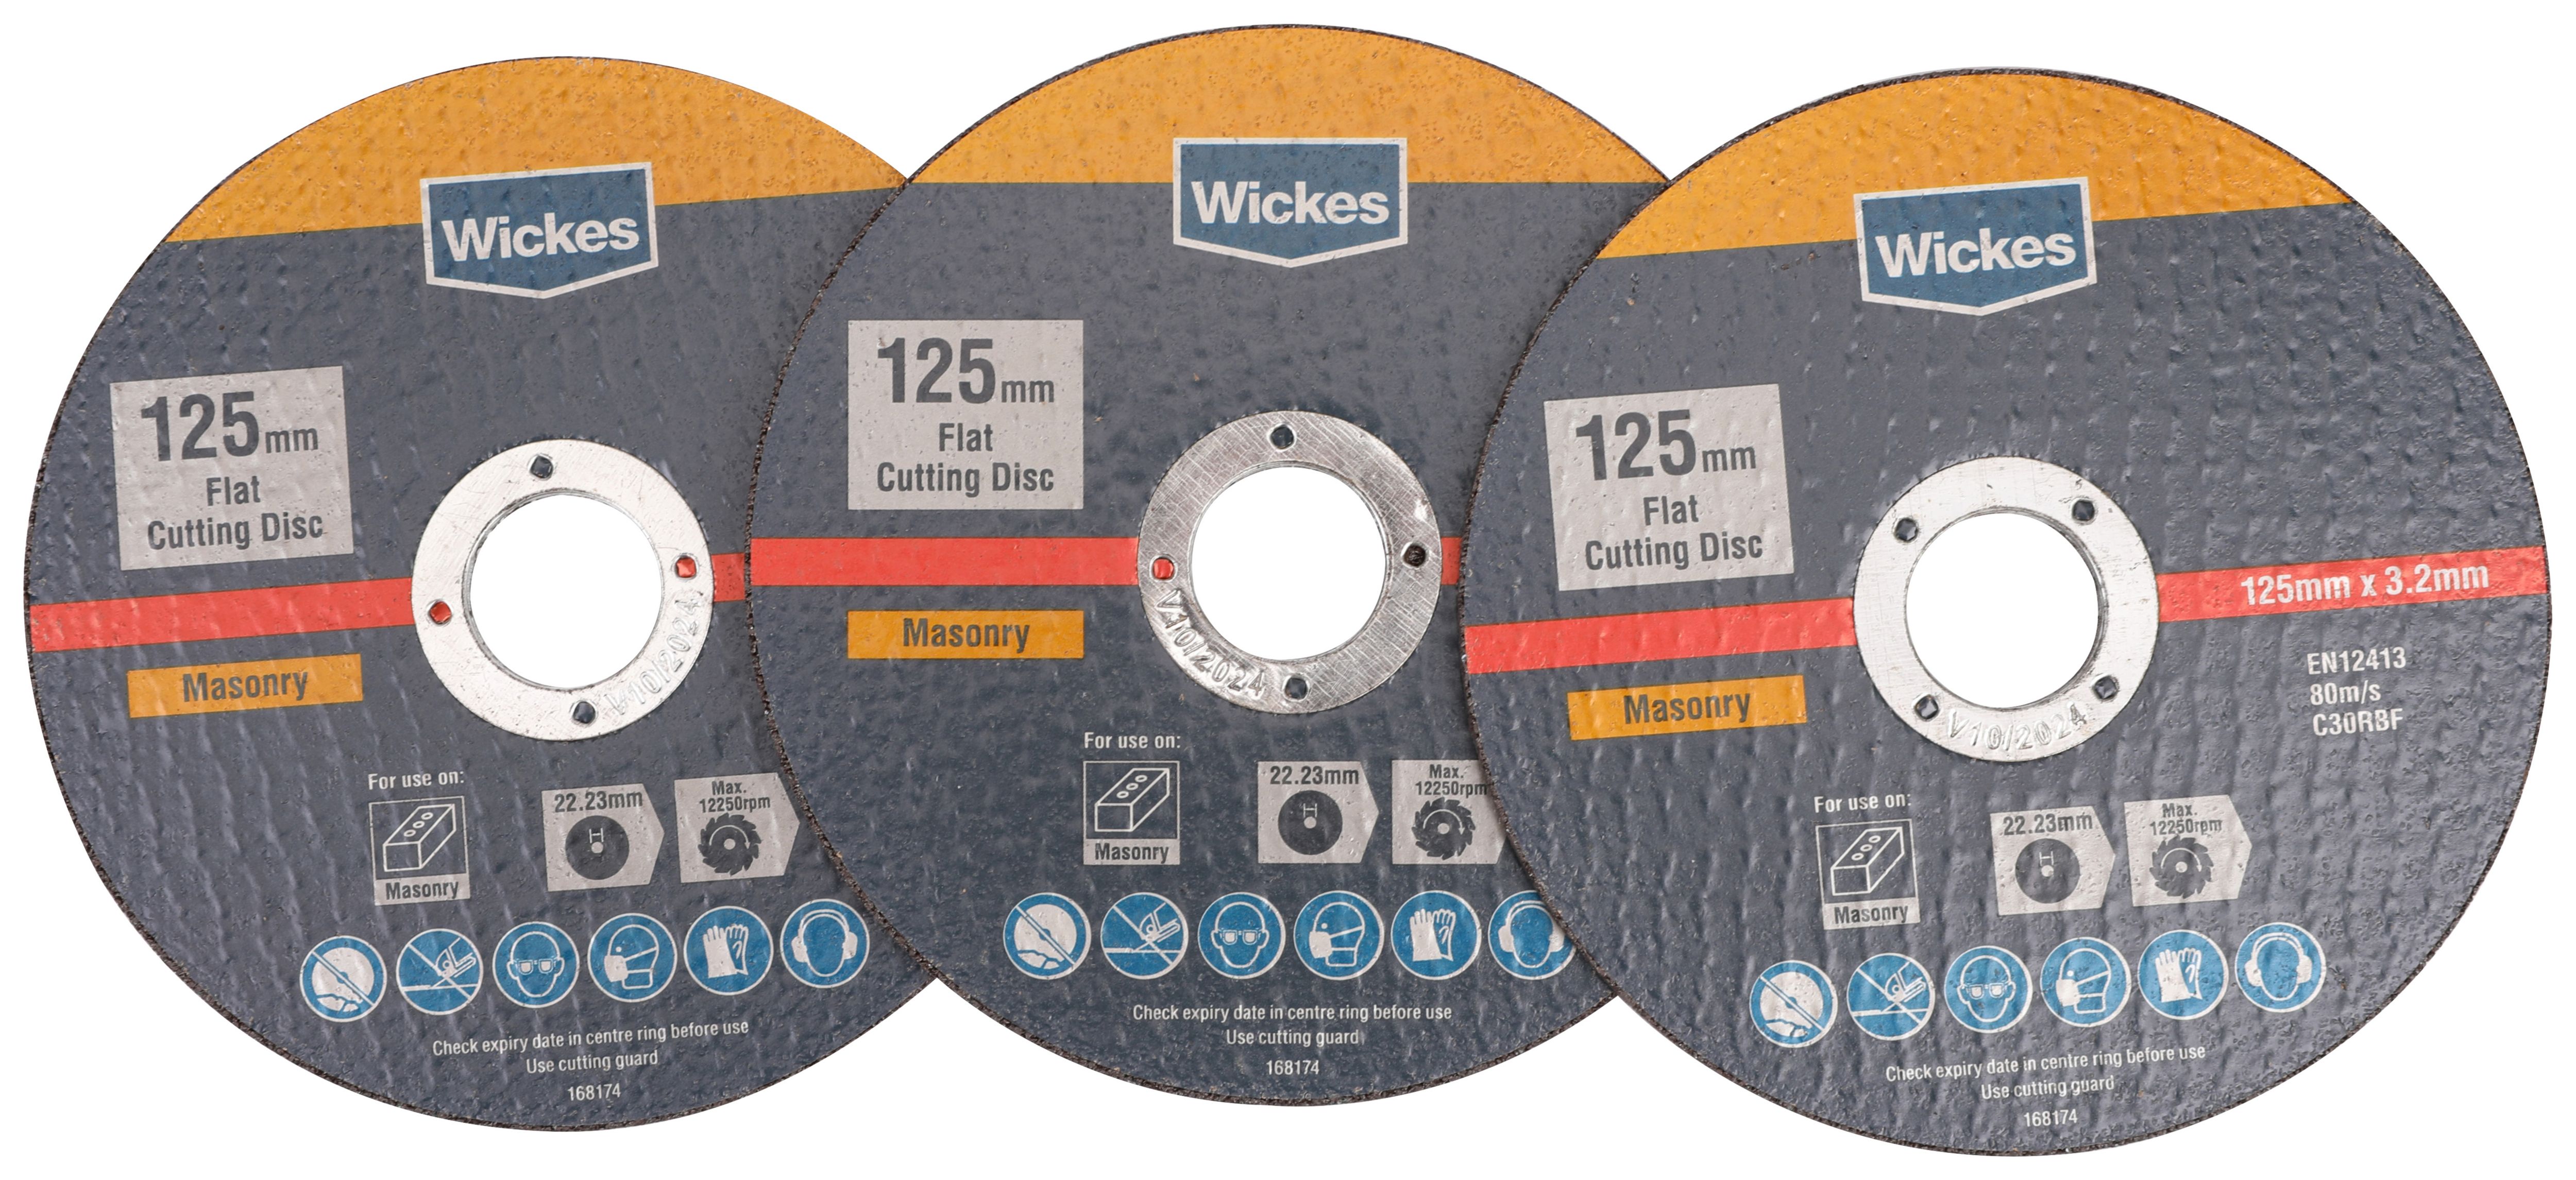 Image of Wickes Masonry Flat Cutting Disc 125mm Pack of 3